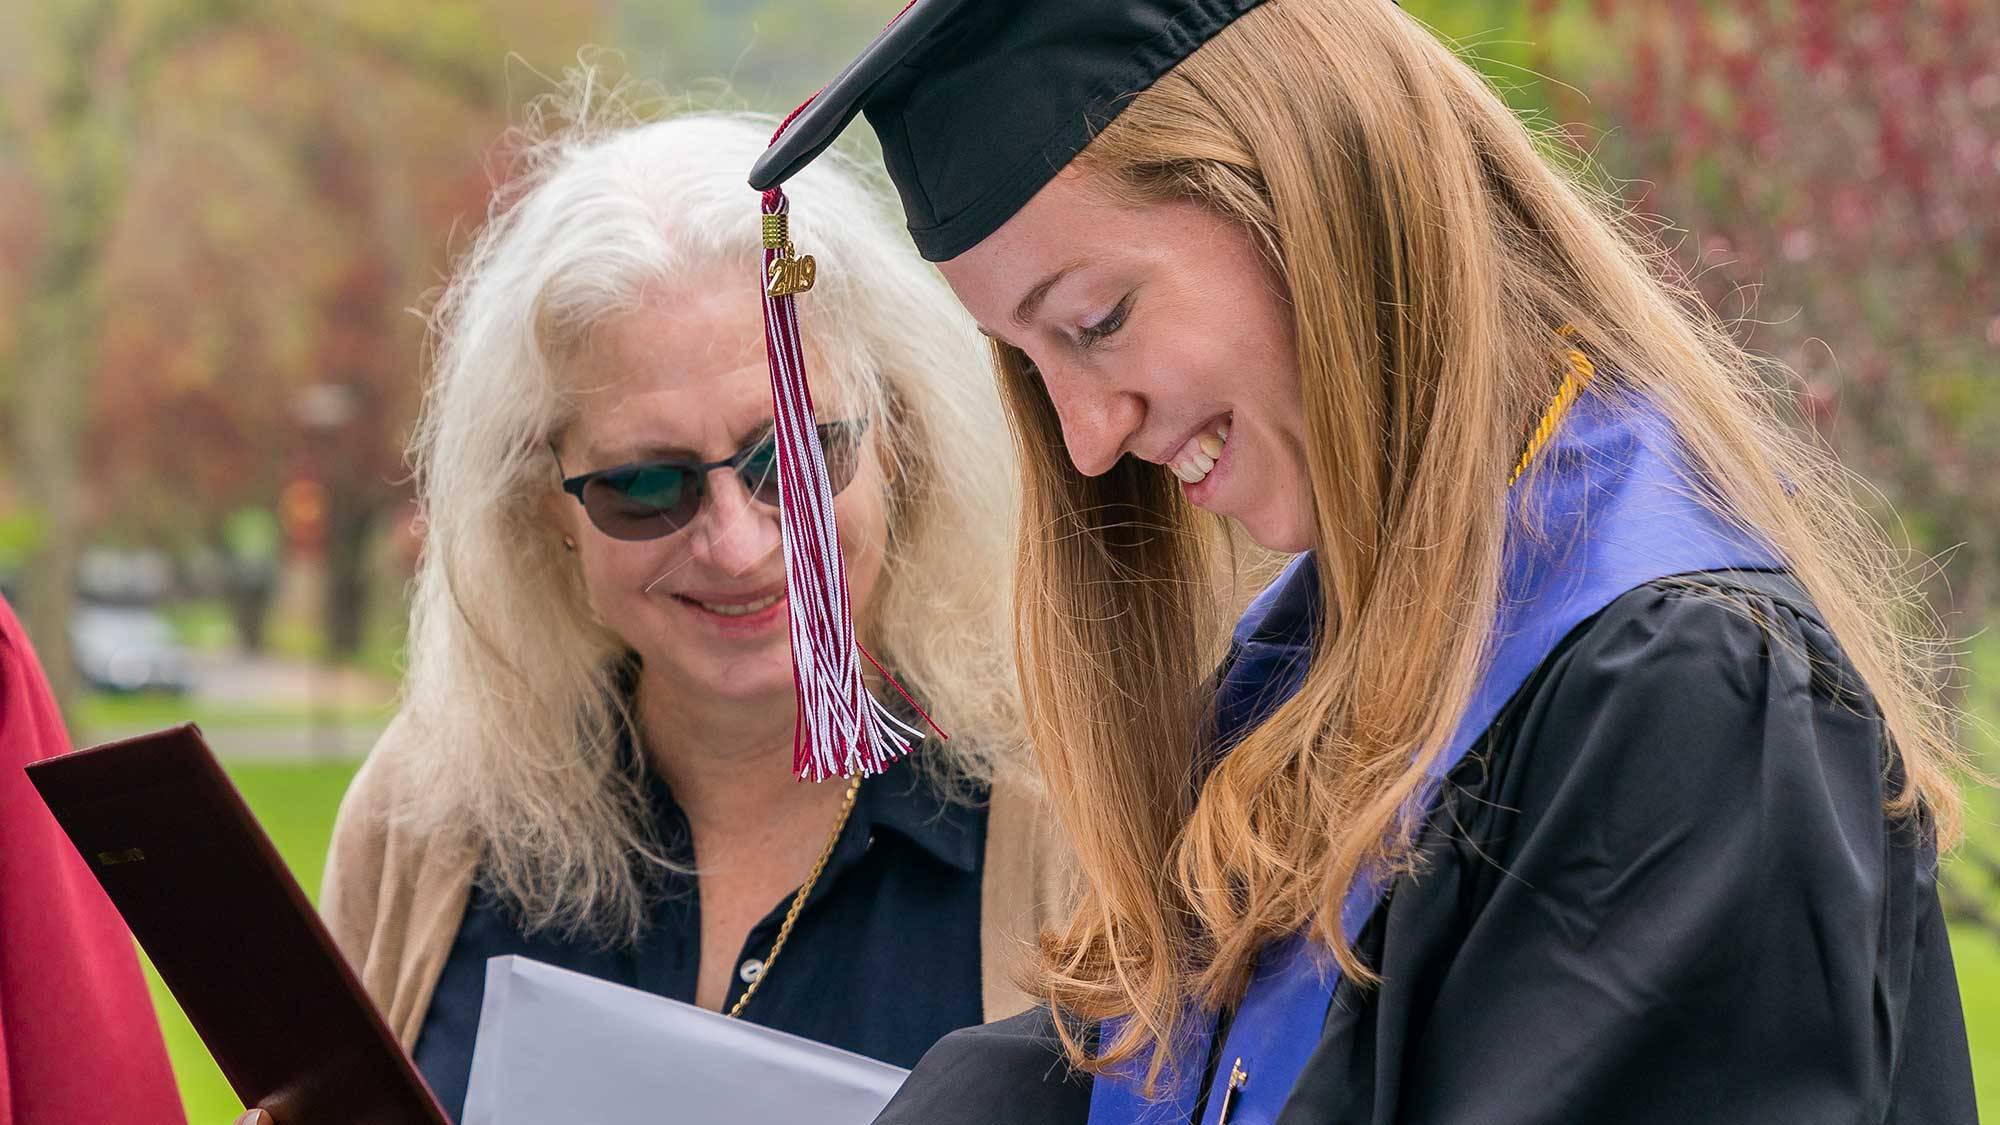 Caroline Hashagen looks at her diploma as her mother smiles in the background